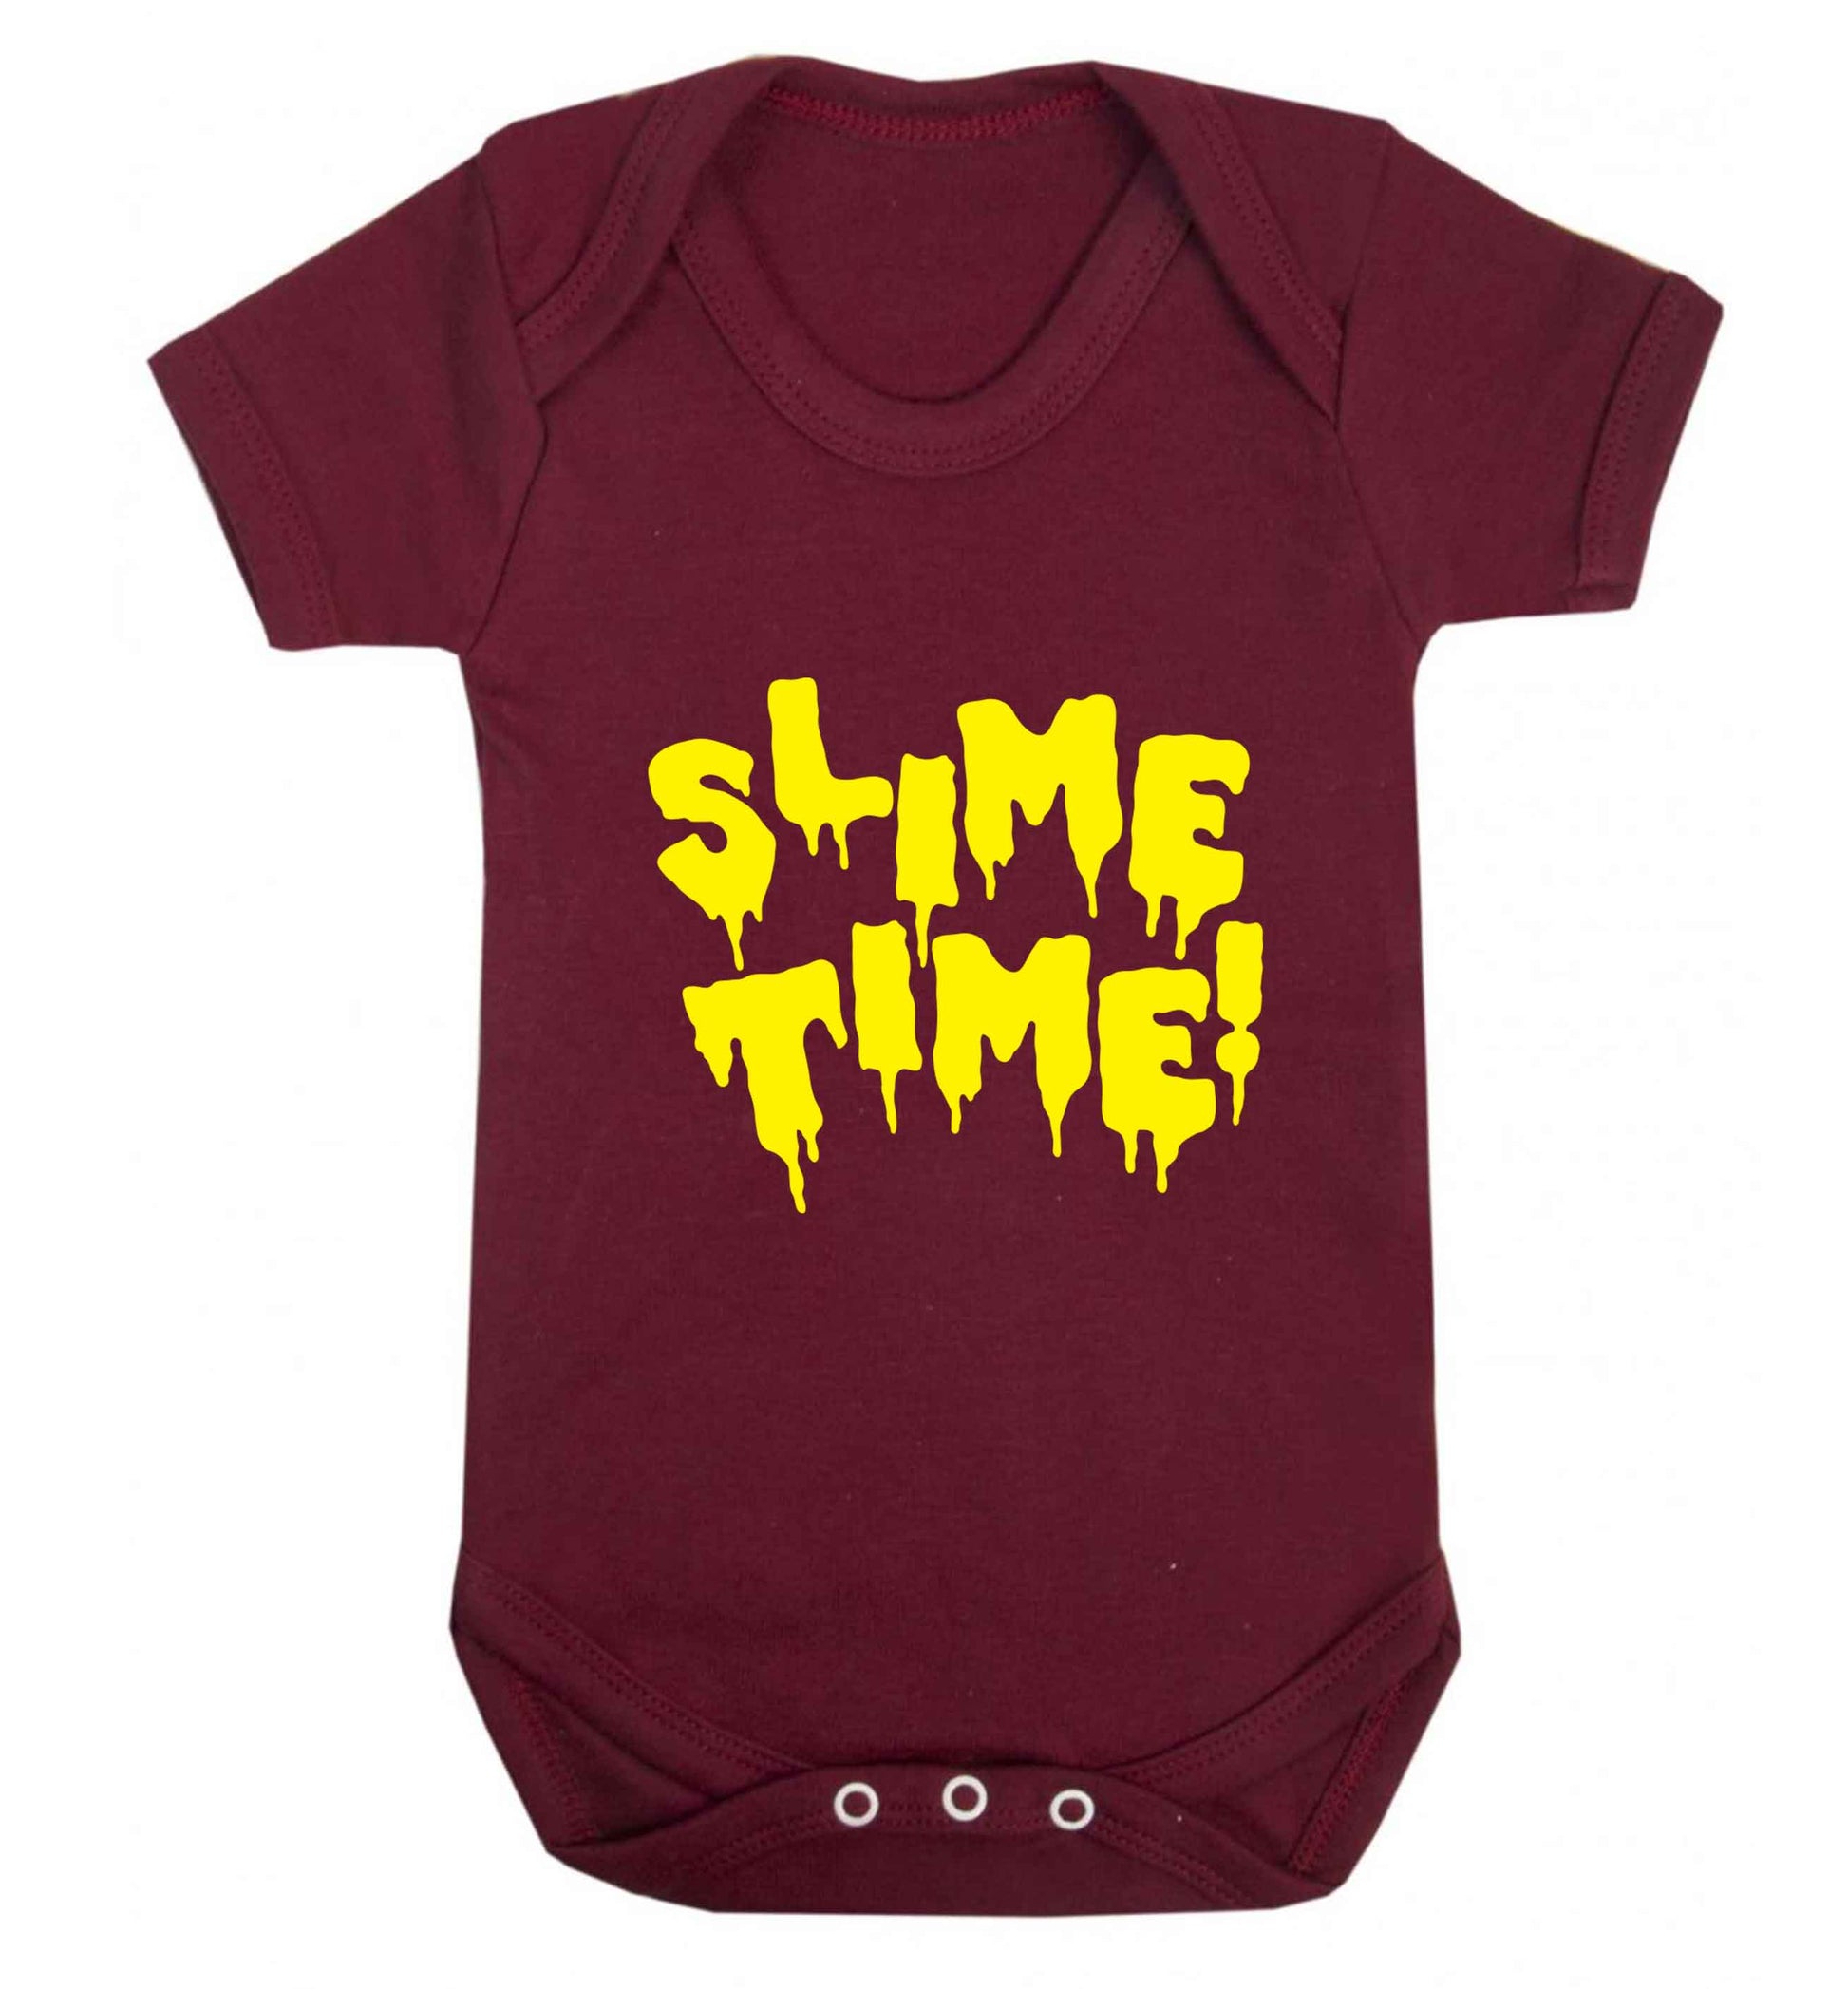 Neon yellow slime time baby vest maroon 18-24 months